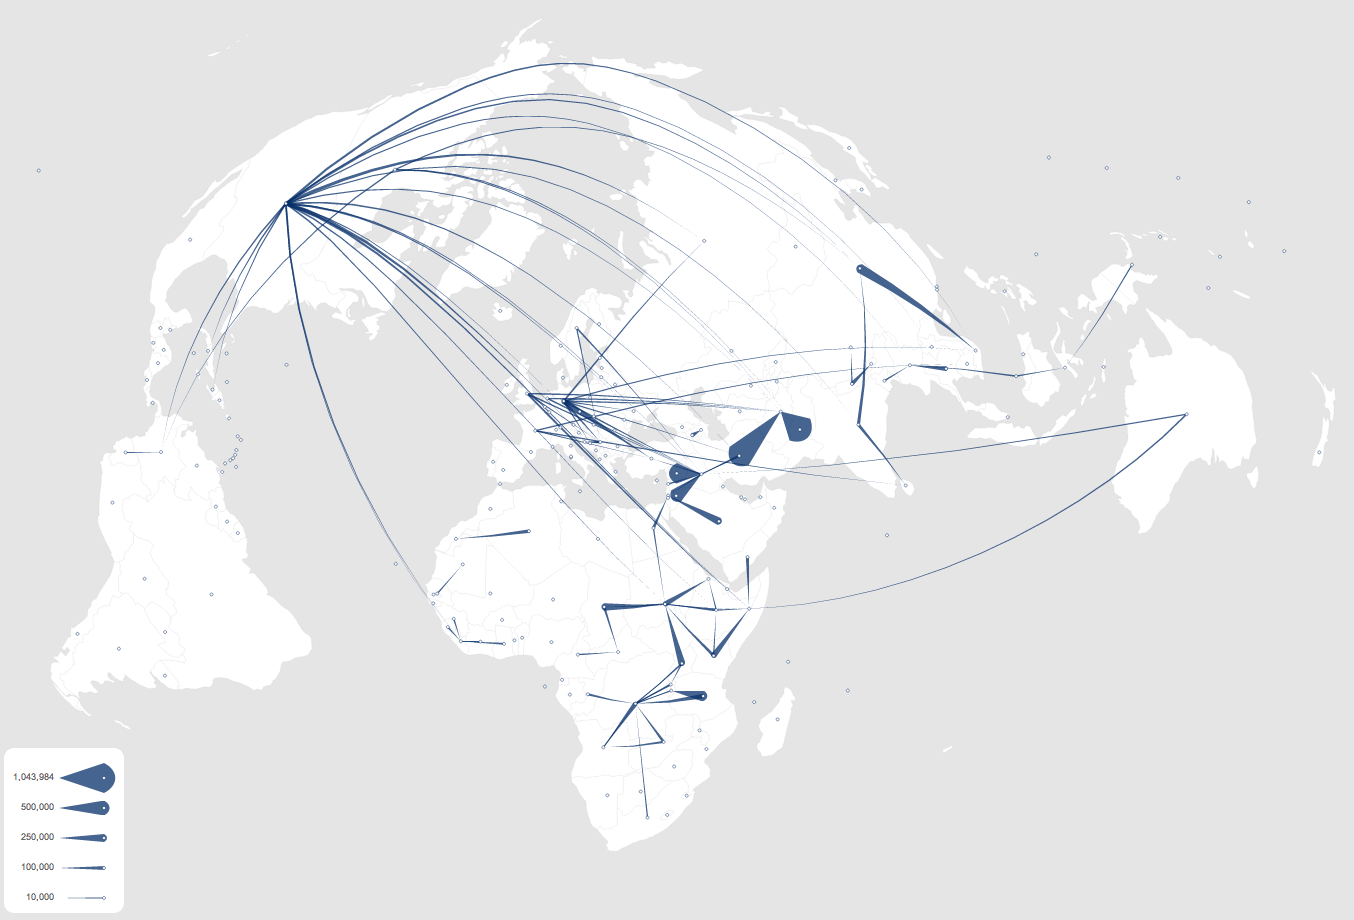 jflowmap-js: flow map showing refugees data by UNHCR